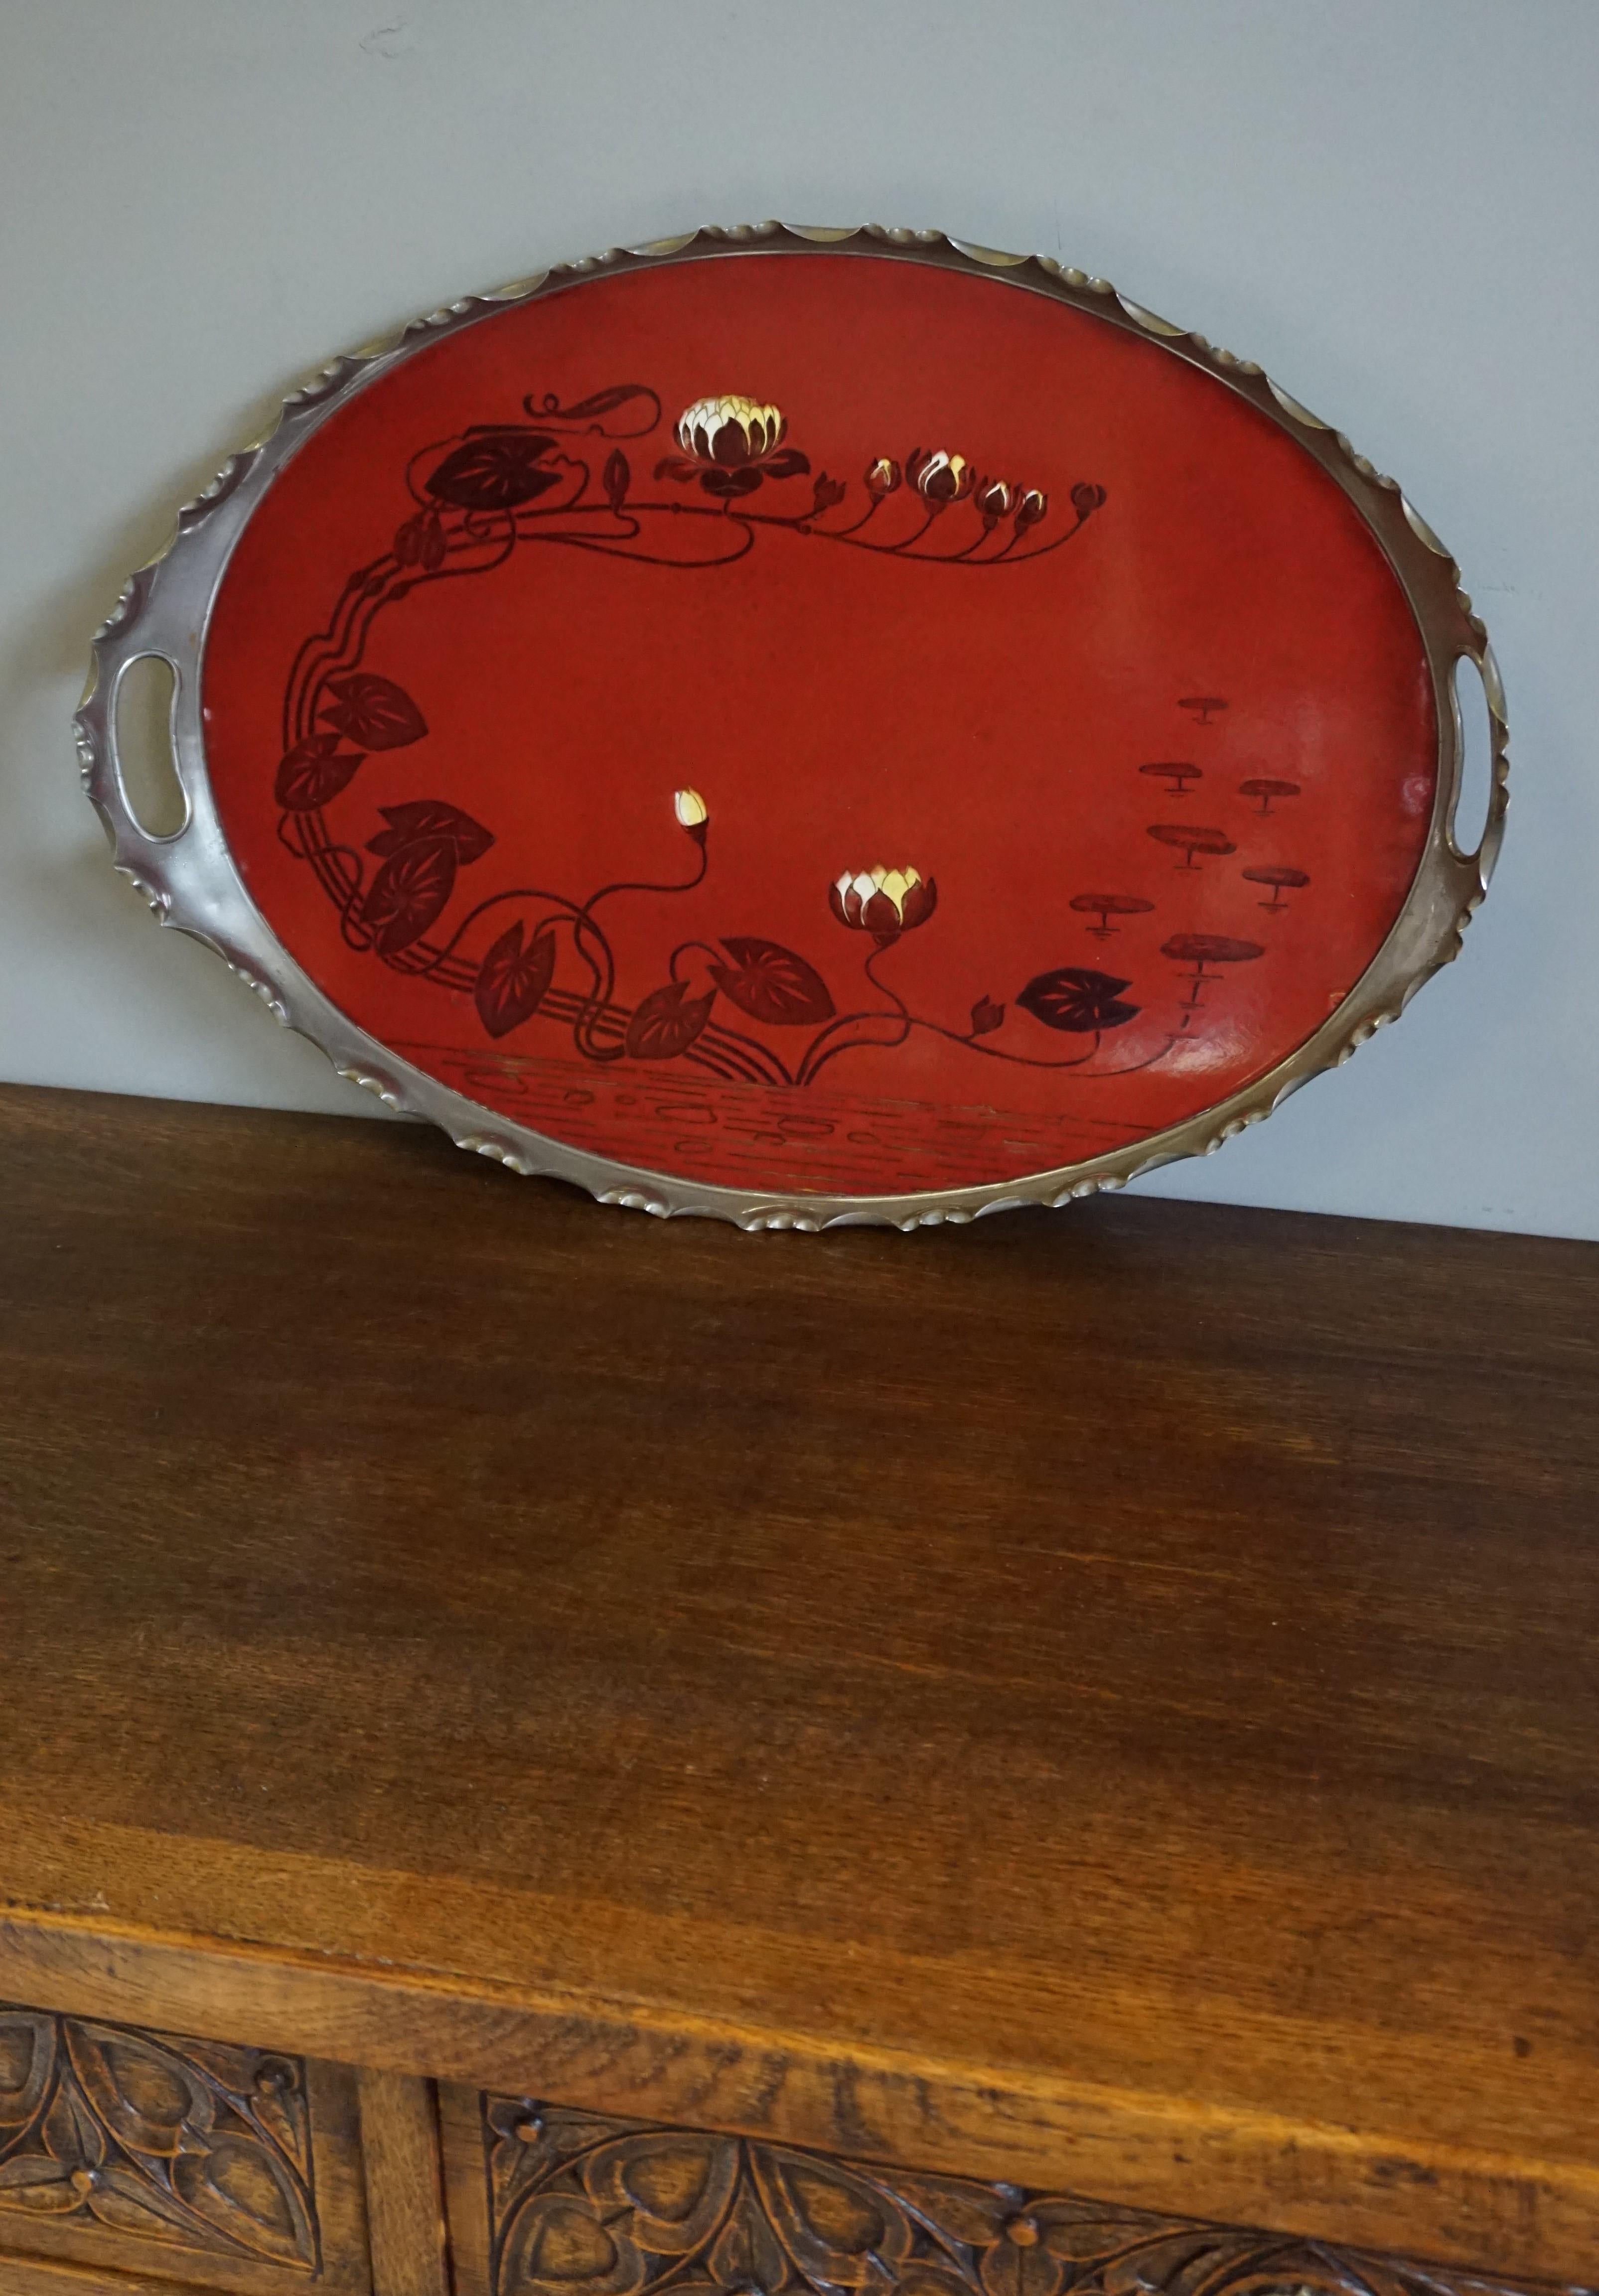 Rare and beautifully hand painted porcelain tile in chrome metal frame serving tray.

This beautiful quality, oval shaped tile serving tray is an absolute joy to own and to look at. It is one of the largest, single tile serving trays we have ever